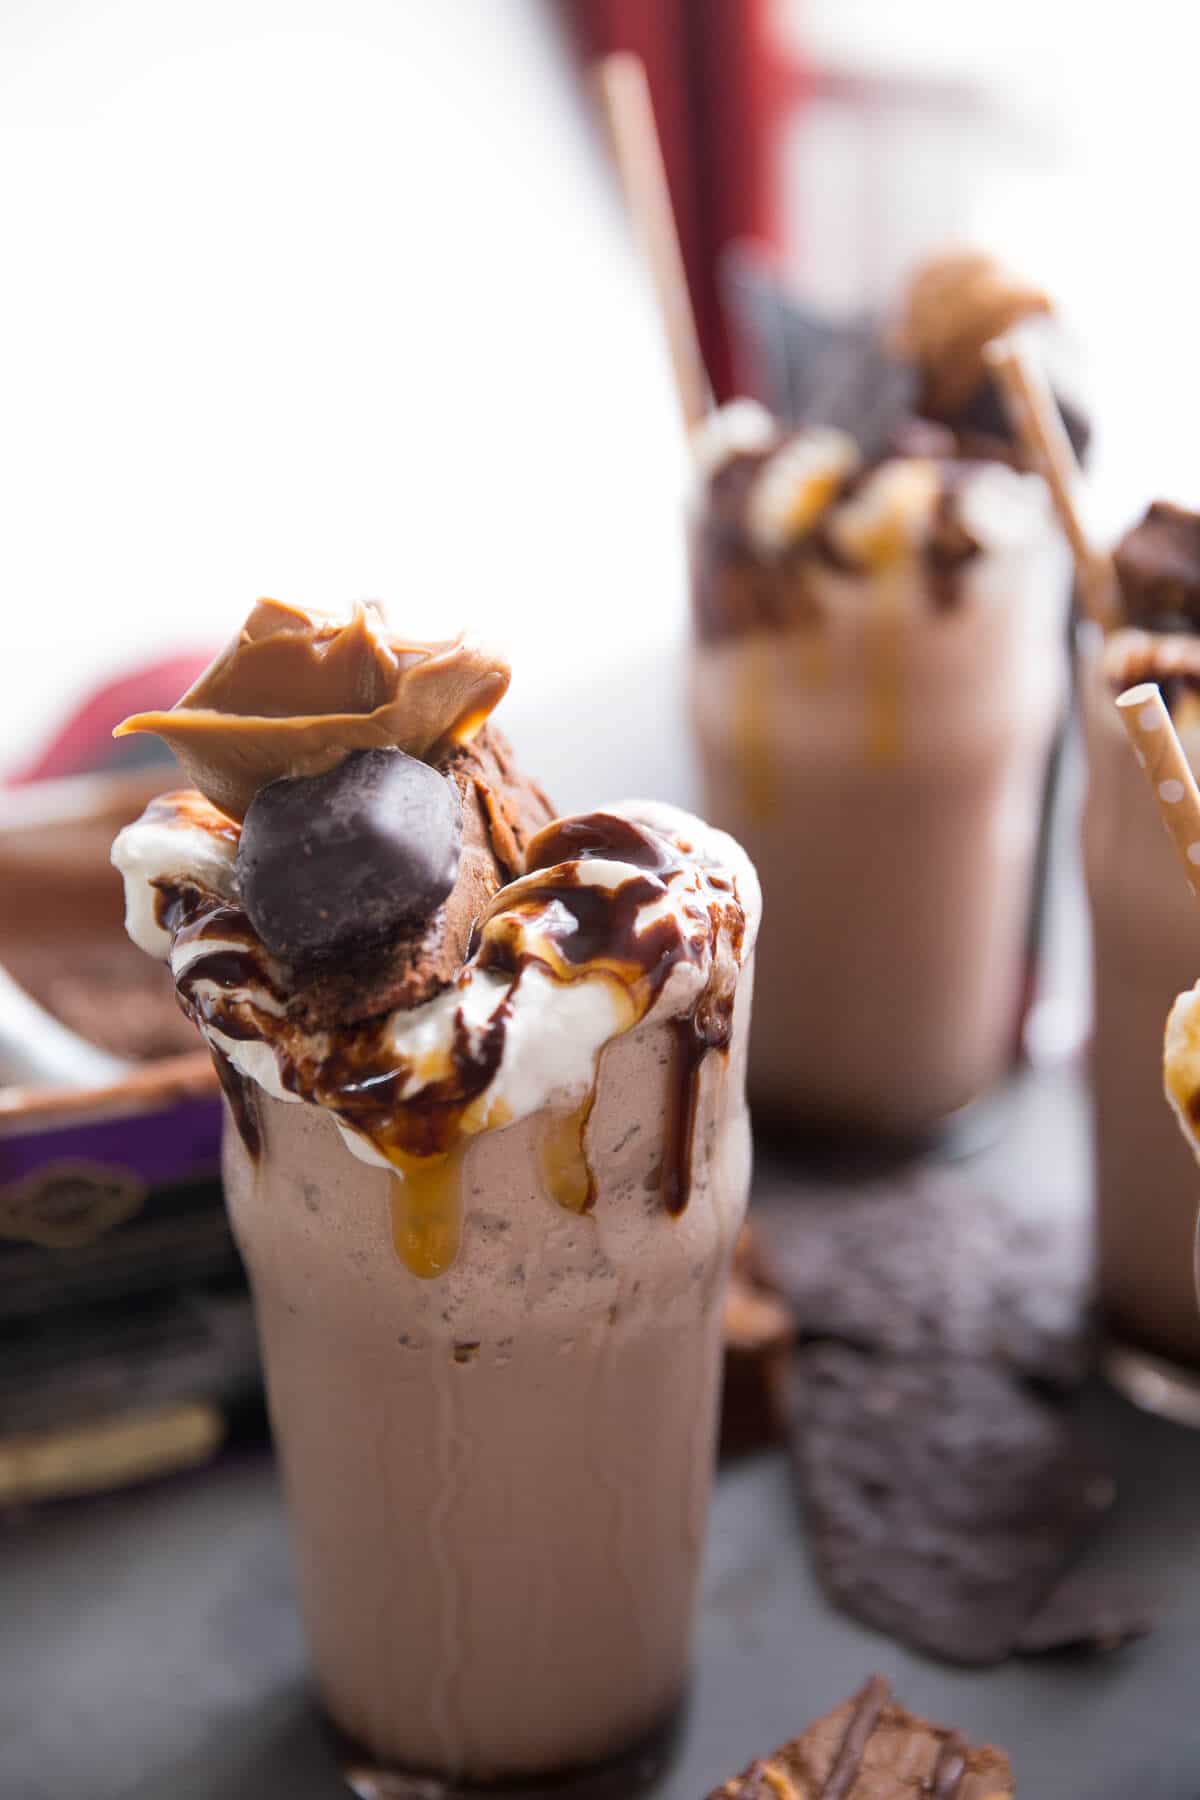 This salted caramel milkshake is for extreme salted caramel lovers! Brownies, candies, salted caramel sauce, and two kinds of ice creams make this one memorable and extreme milkshake!